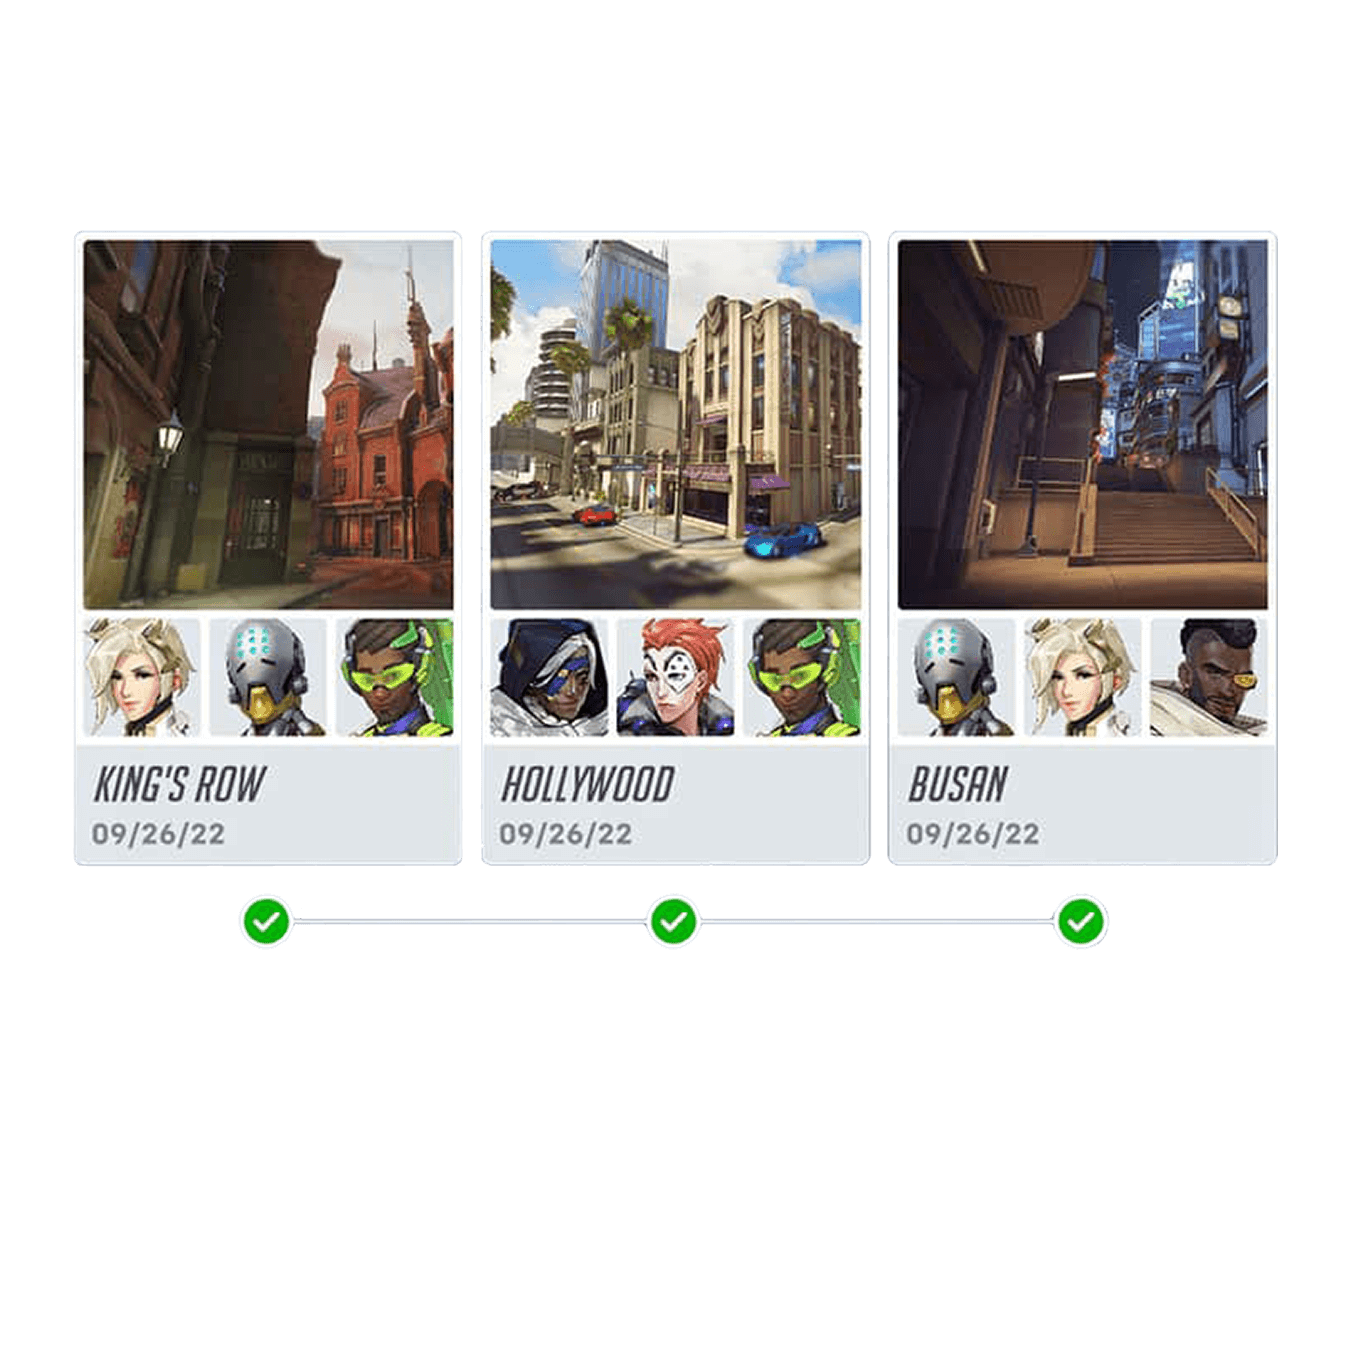 Placement Matches boost in Overwatch 2